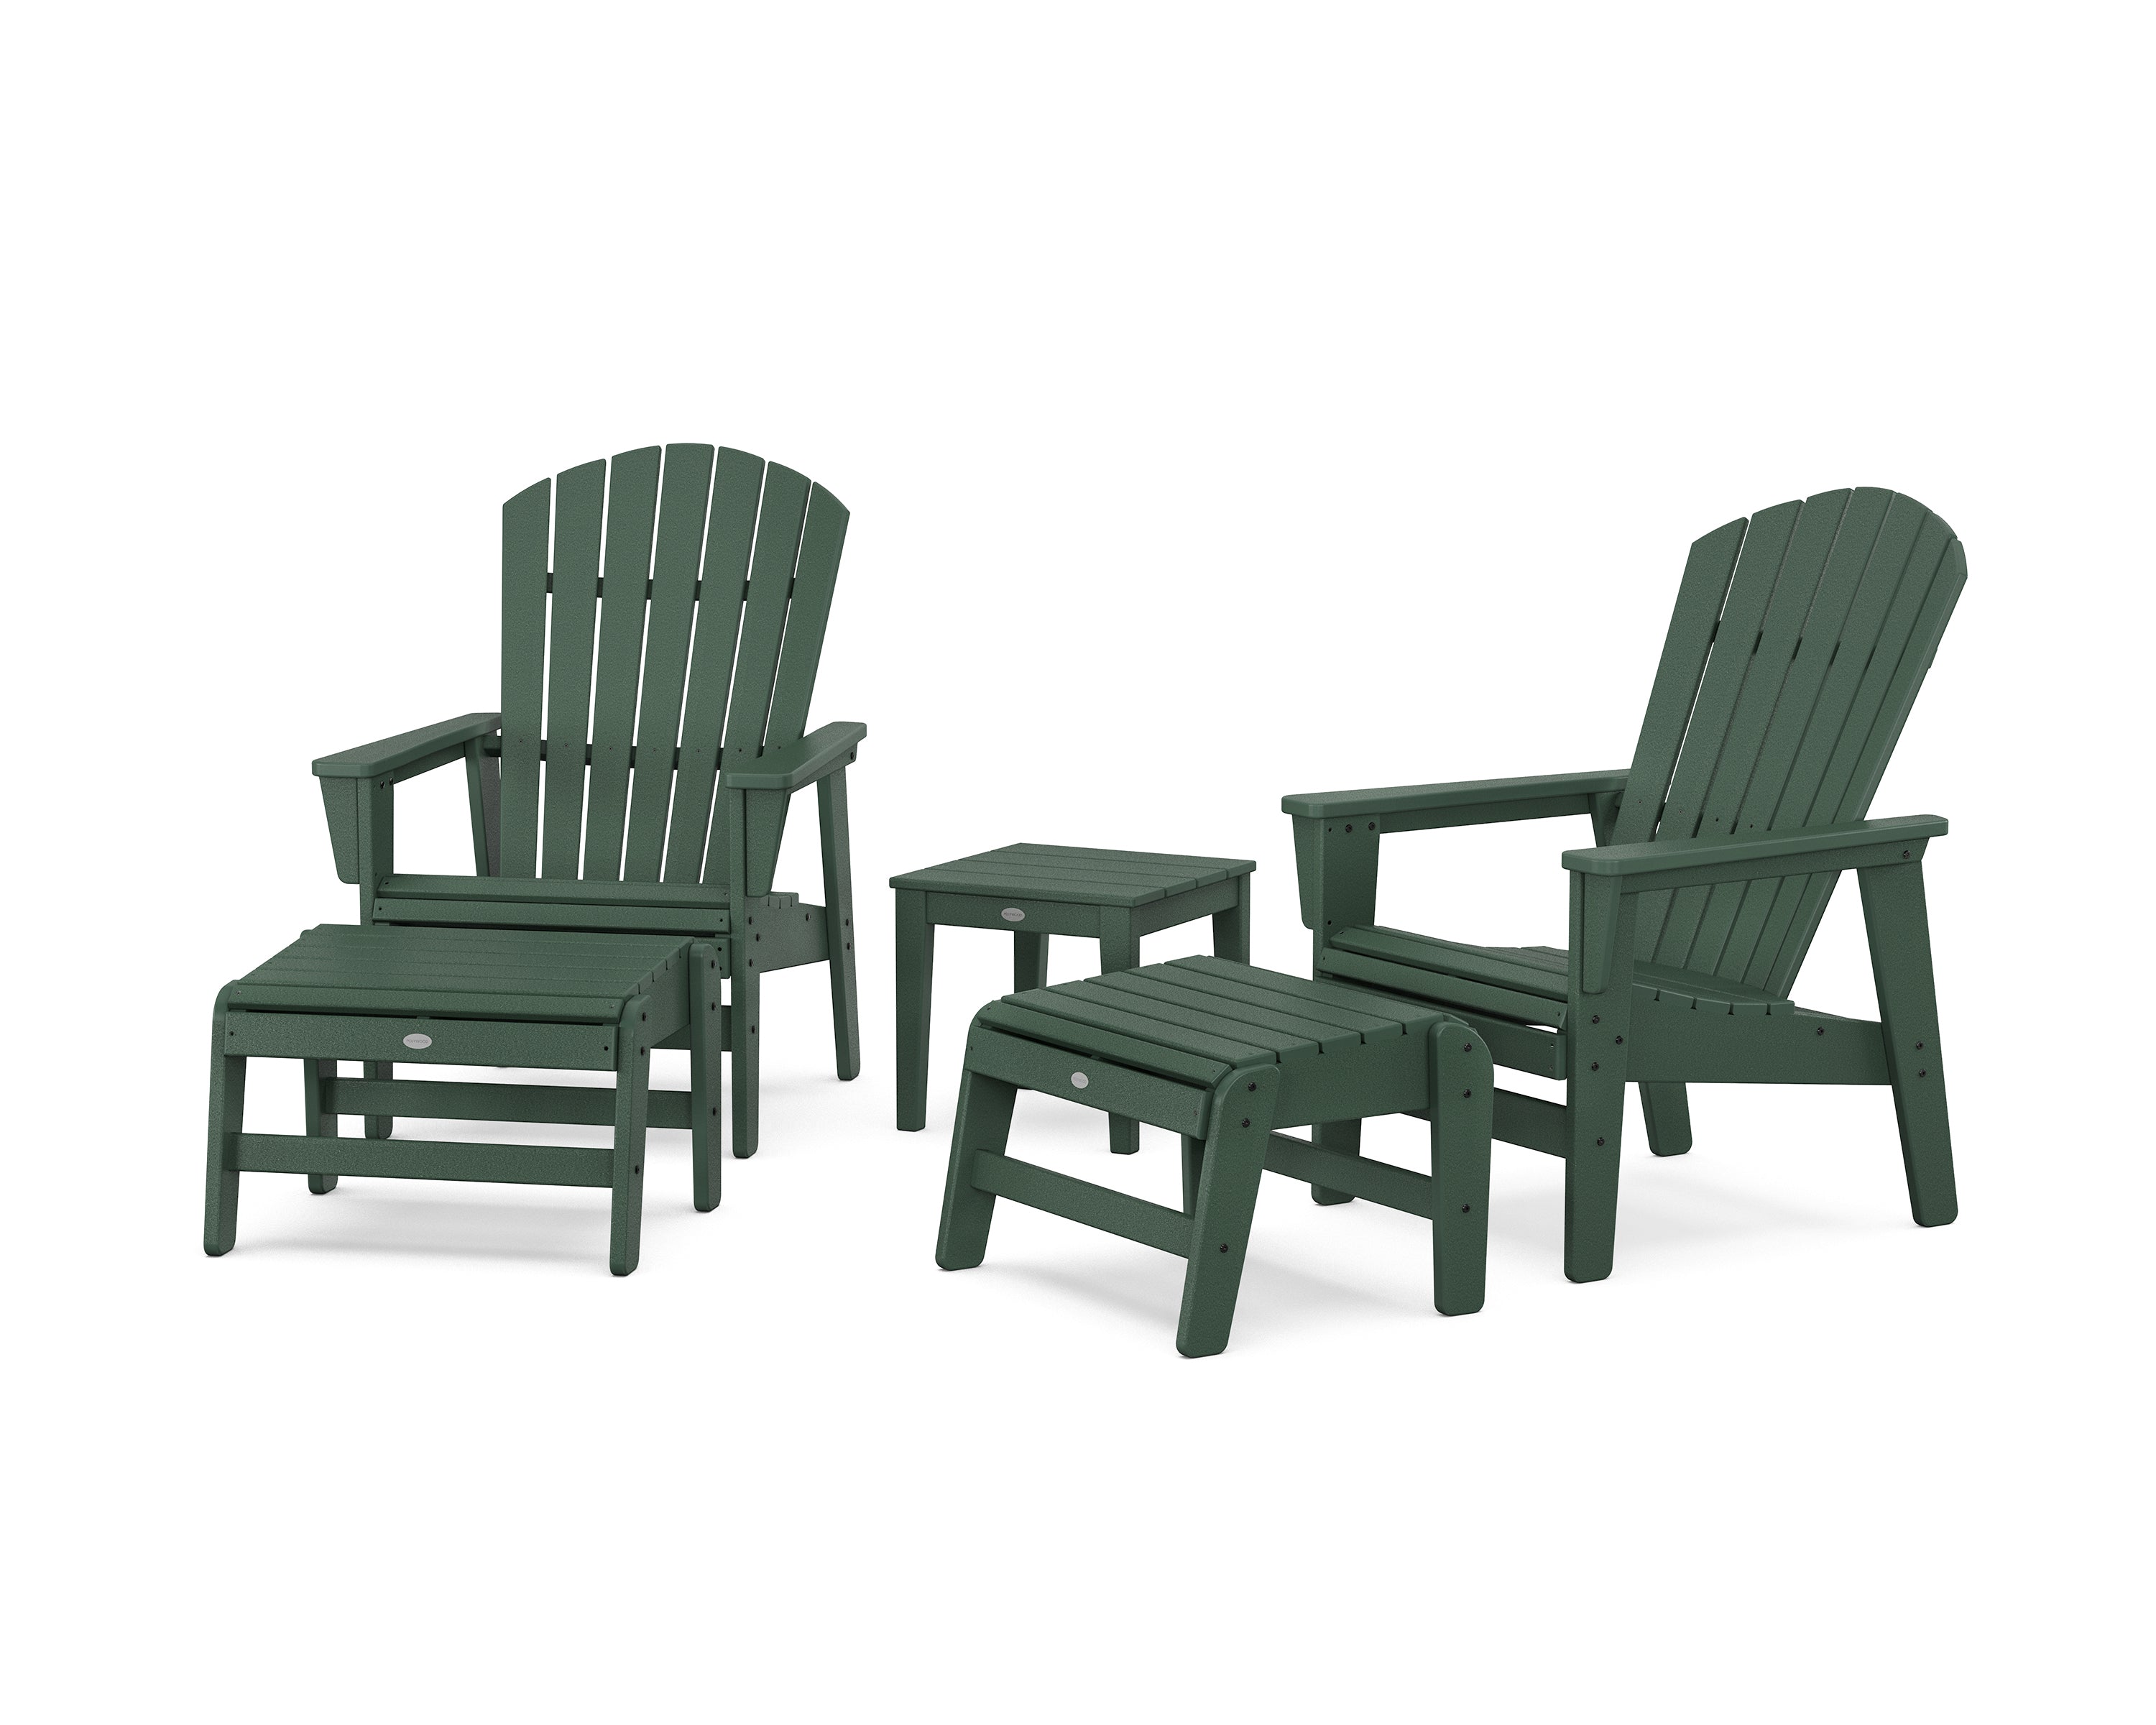 POLYWOOD® 5-Piece Nautical Grand Upright Adirondack Set with Ottomans and Side Table in Green